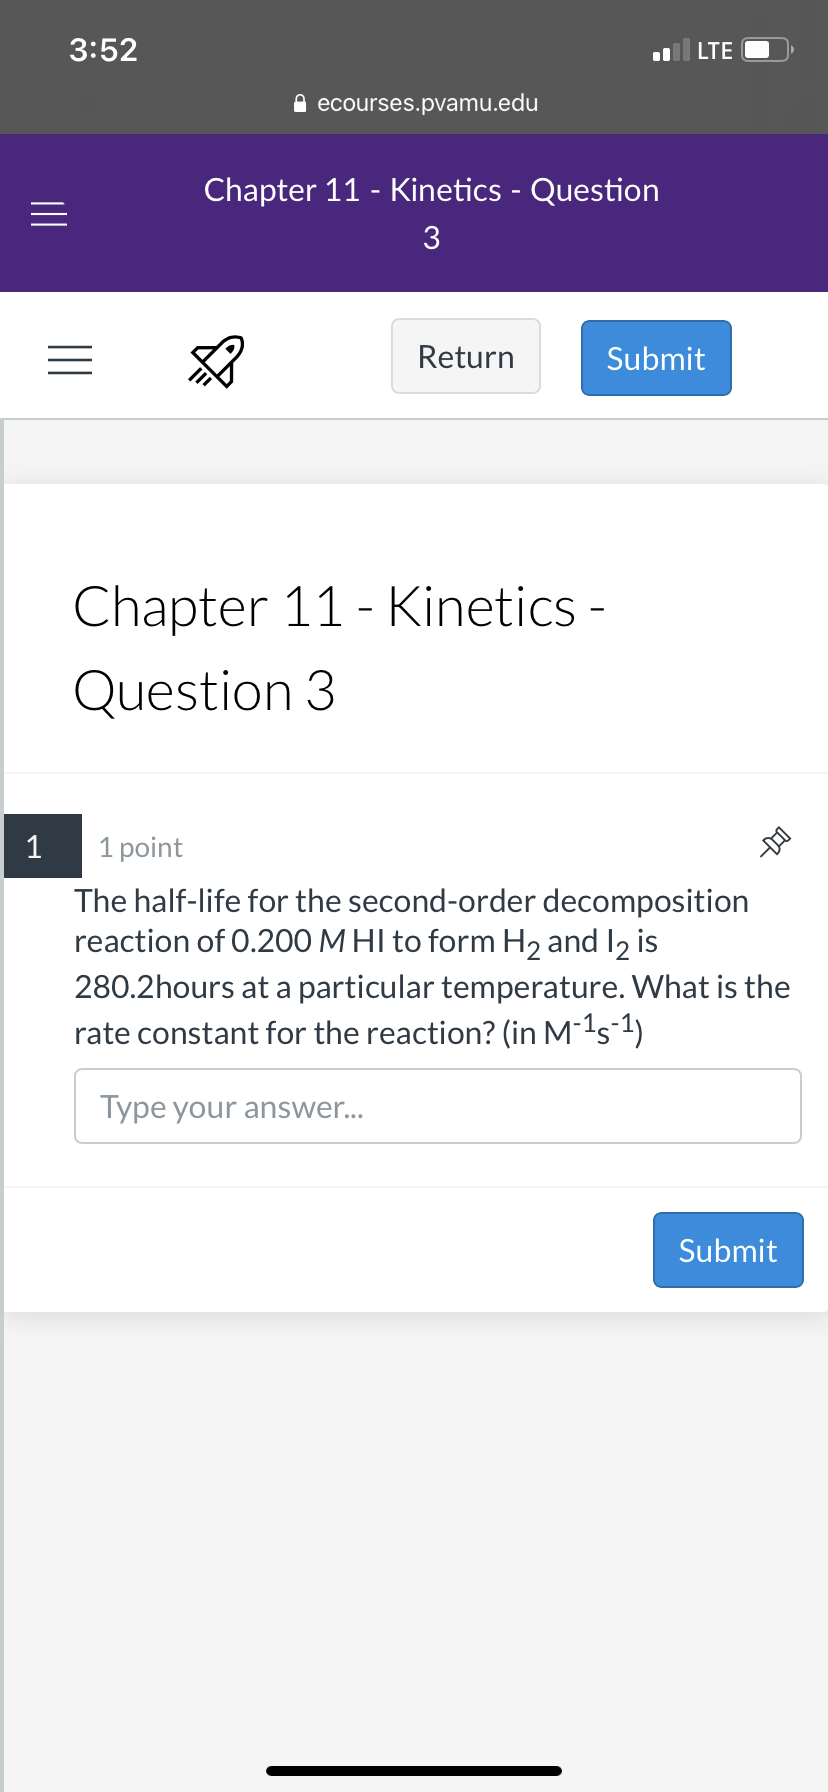 3:52
LTE
A ecourses.pvamu.edu
Chapter 11 - Kinetics - Question
3
Return
Submit
Chapter 11 - Kinetics -
Question 3
1
1 point
The half-life for the second-order decomposition
reaction of 0.200 M HI to form H2 and I2 is
280.2hours at a particular temperature. What is the
rate constant for the reaction? (in M¯1s-1)
Type your answer...
Submit
